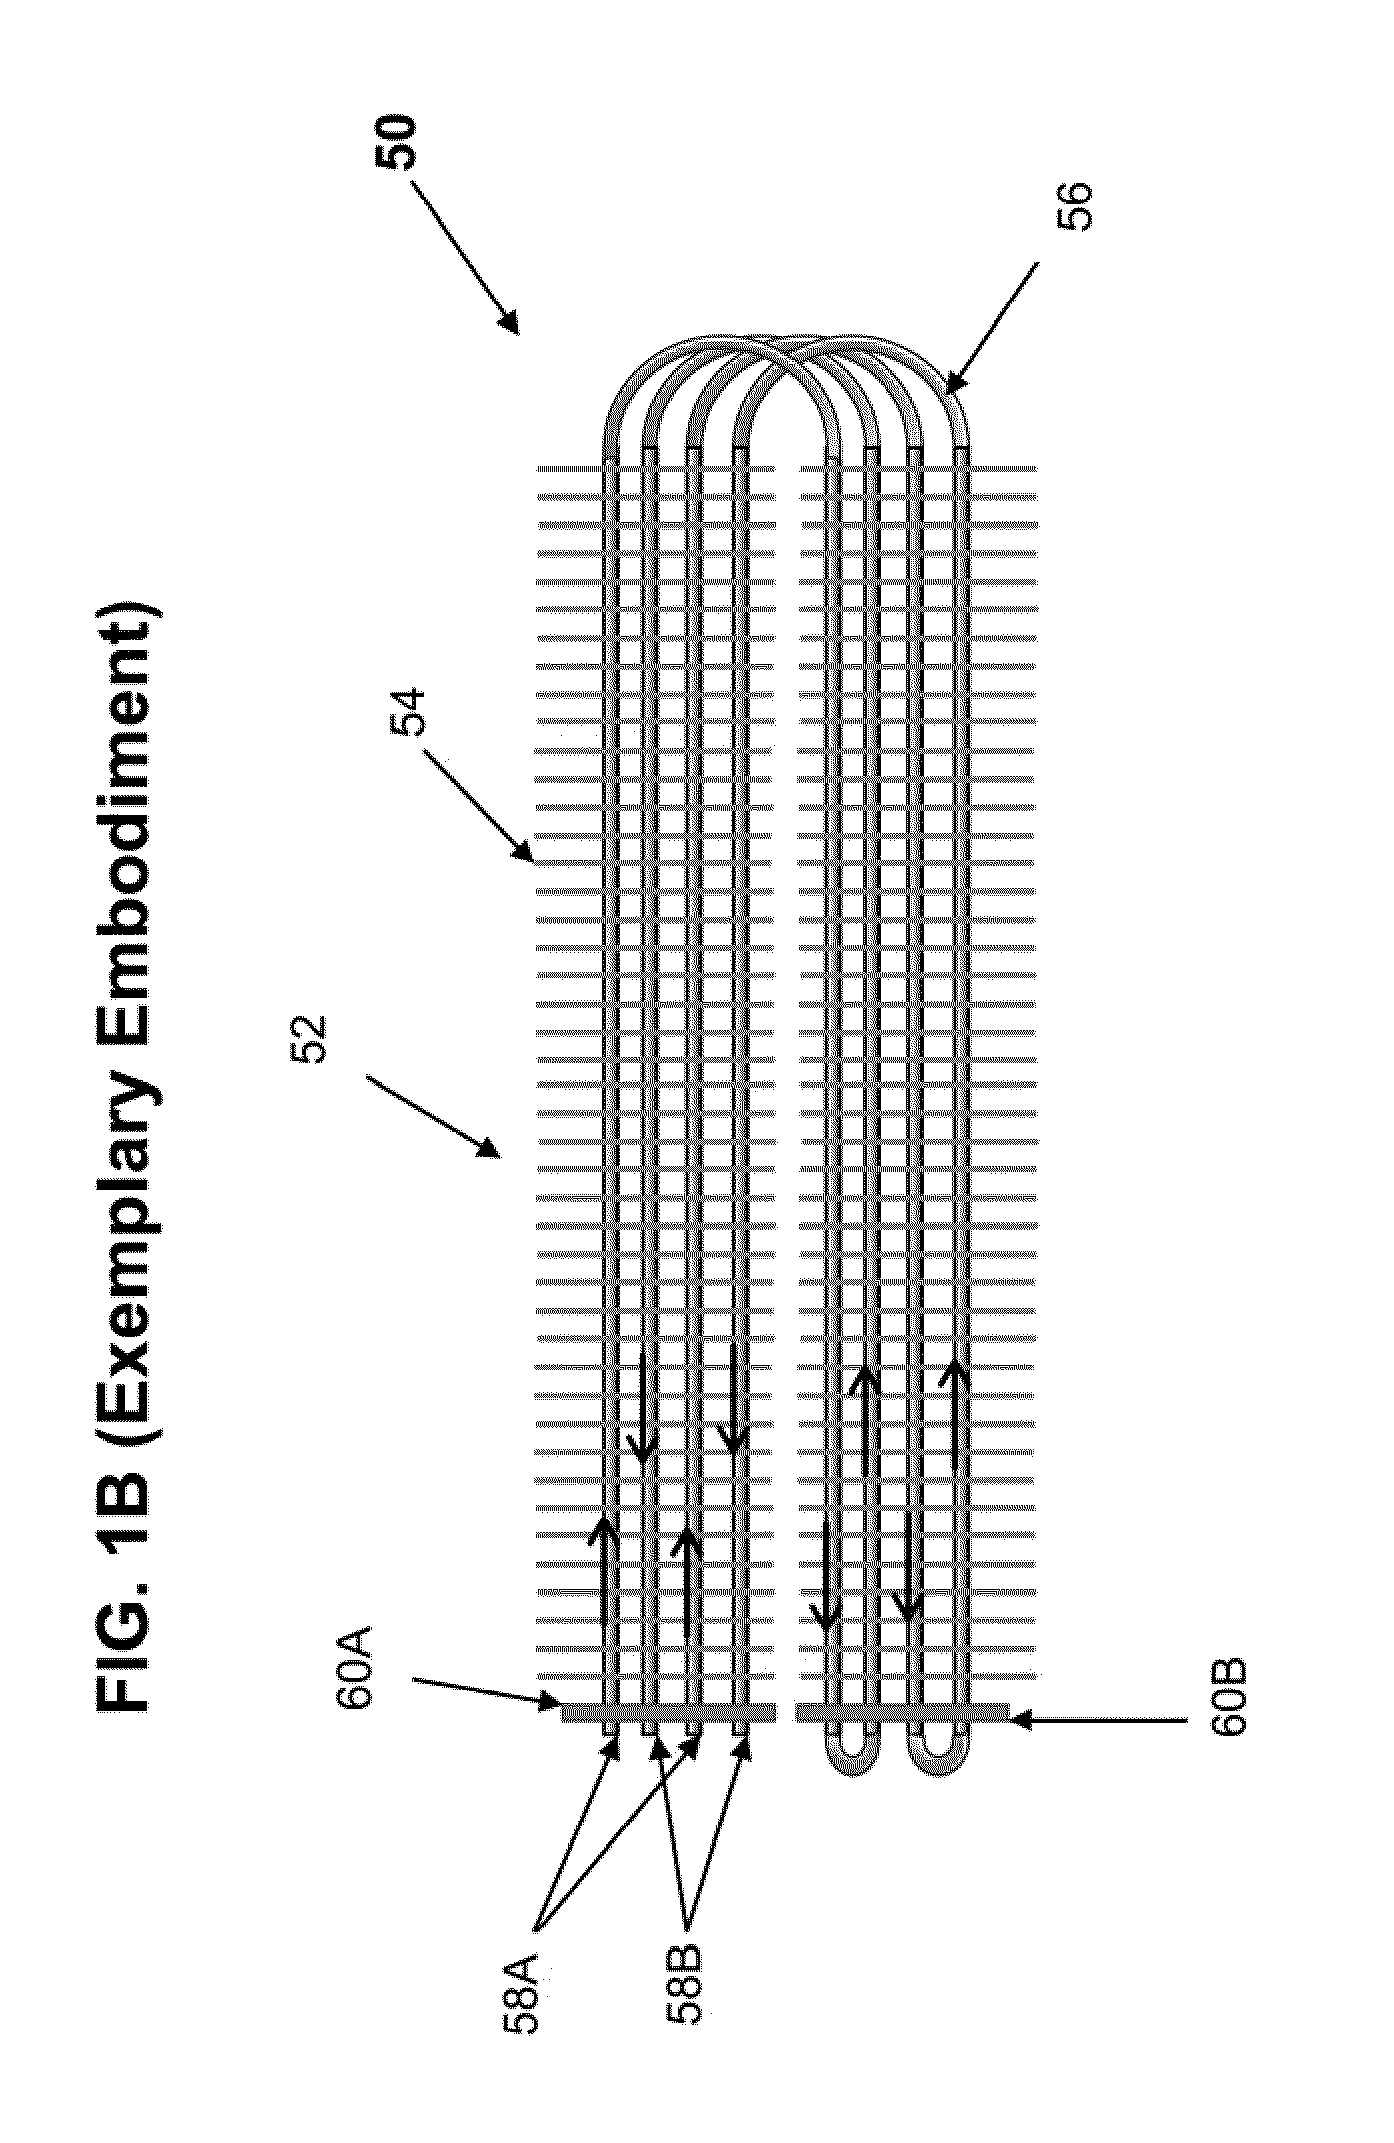 System and Method for Energy-Saving Inductive Heating of Evaporators and Other Heat-Exchangers